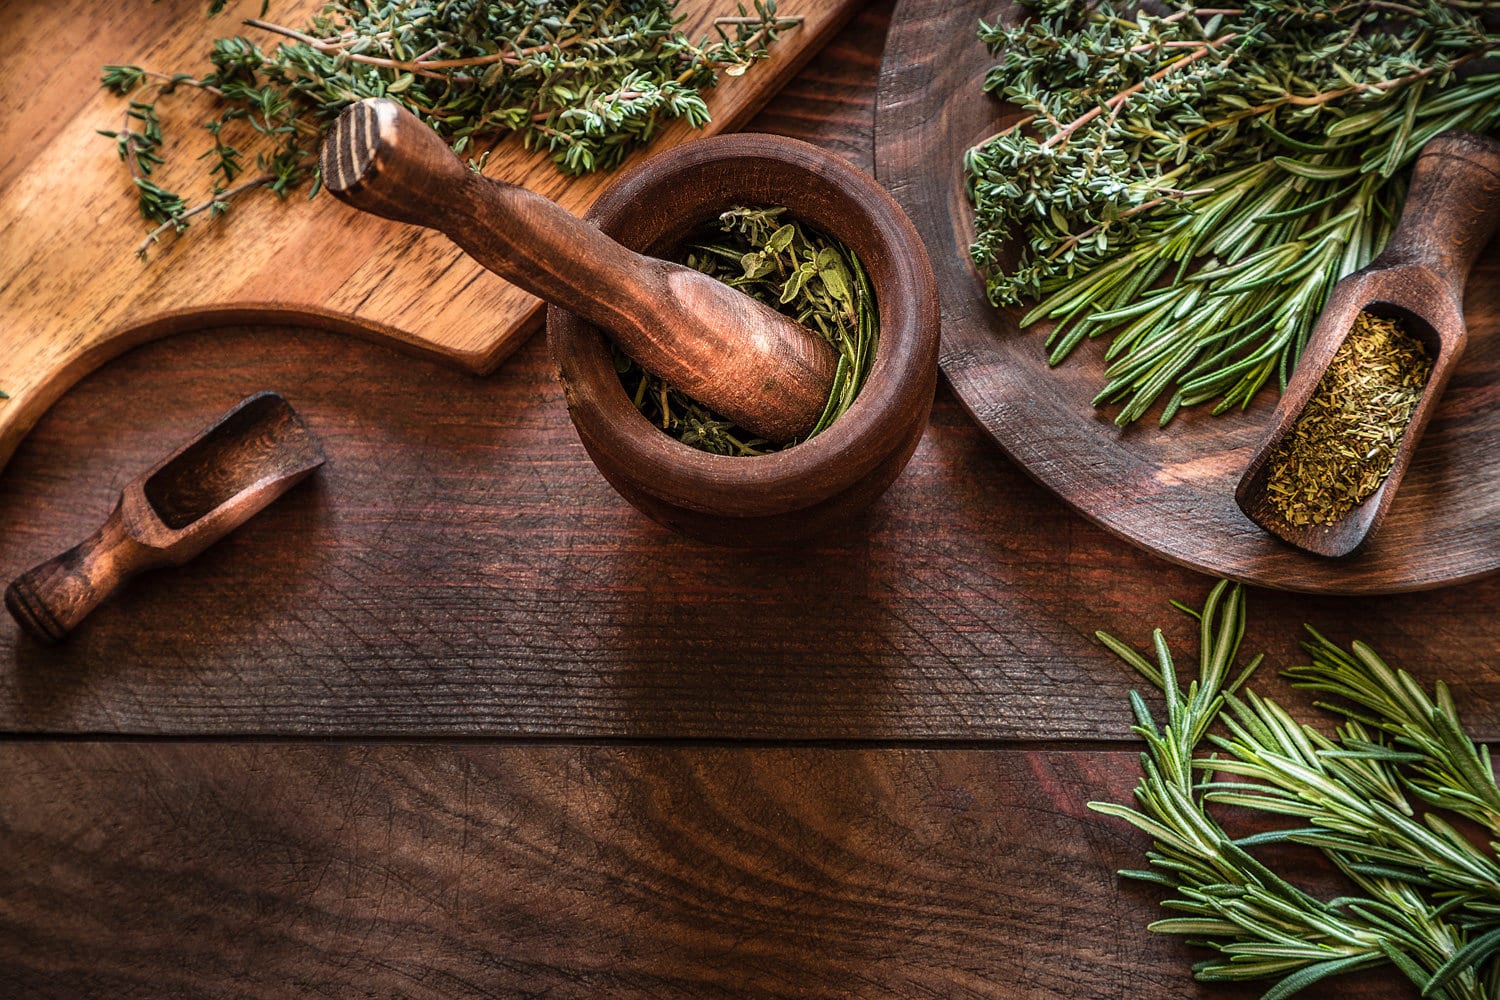 High angle view of natural aromatic herbs like dill, thyme, oregano and rosemary on wooden mortar and over dark brown wooden table. Predominant colors are brown and green. 